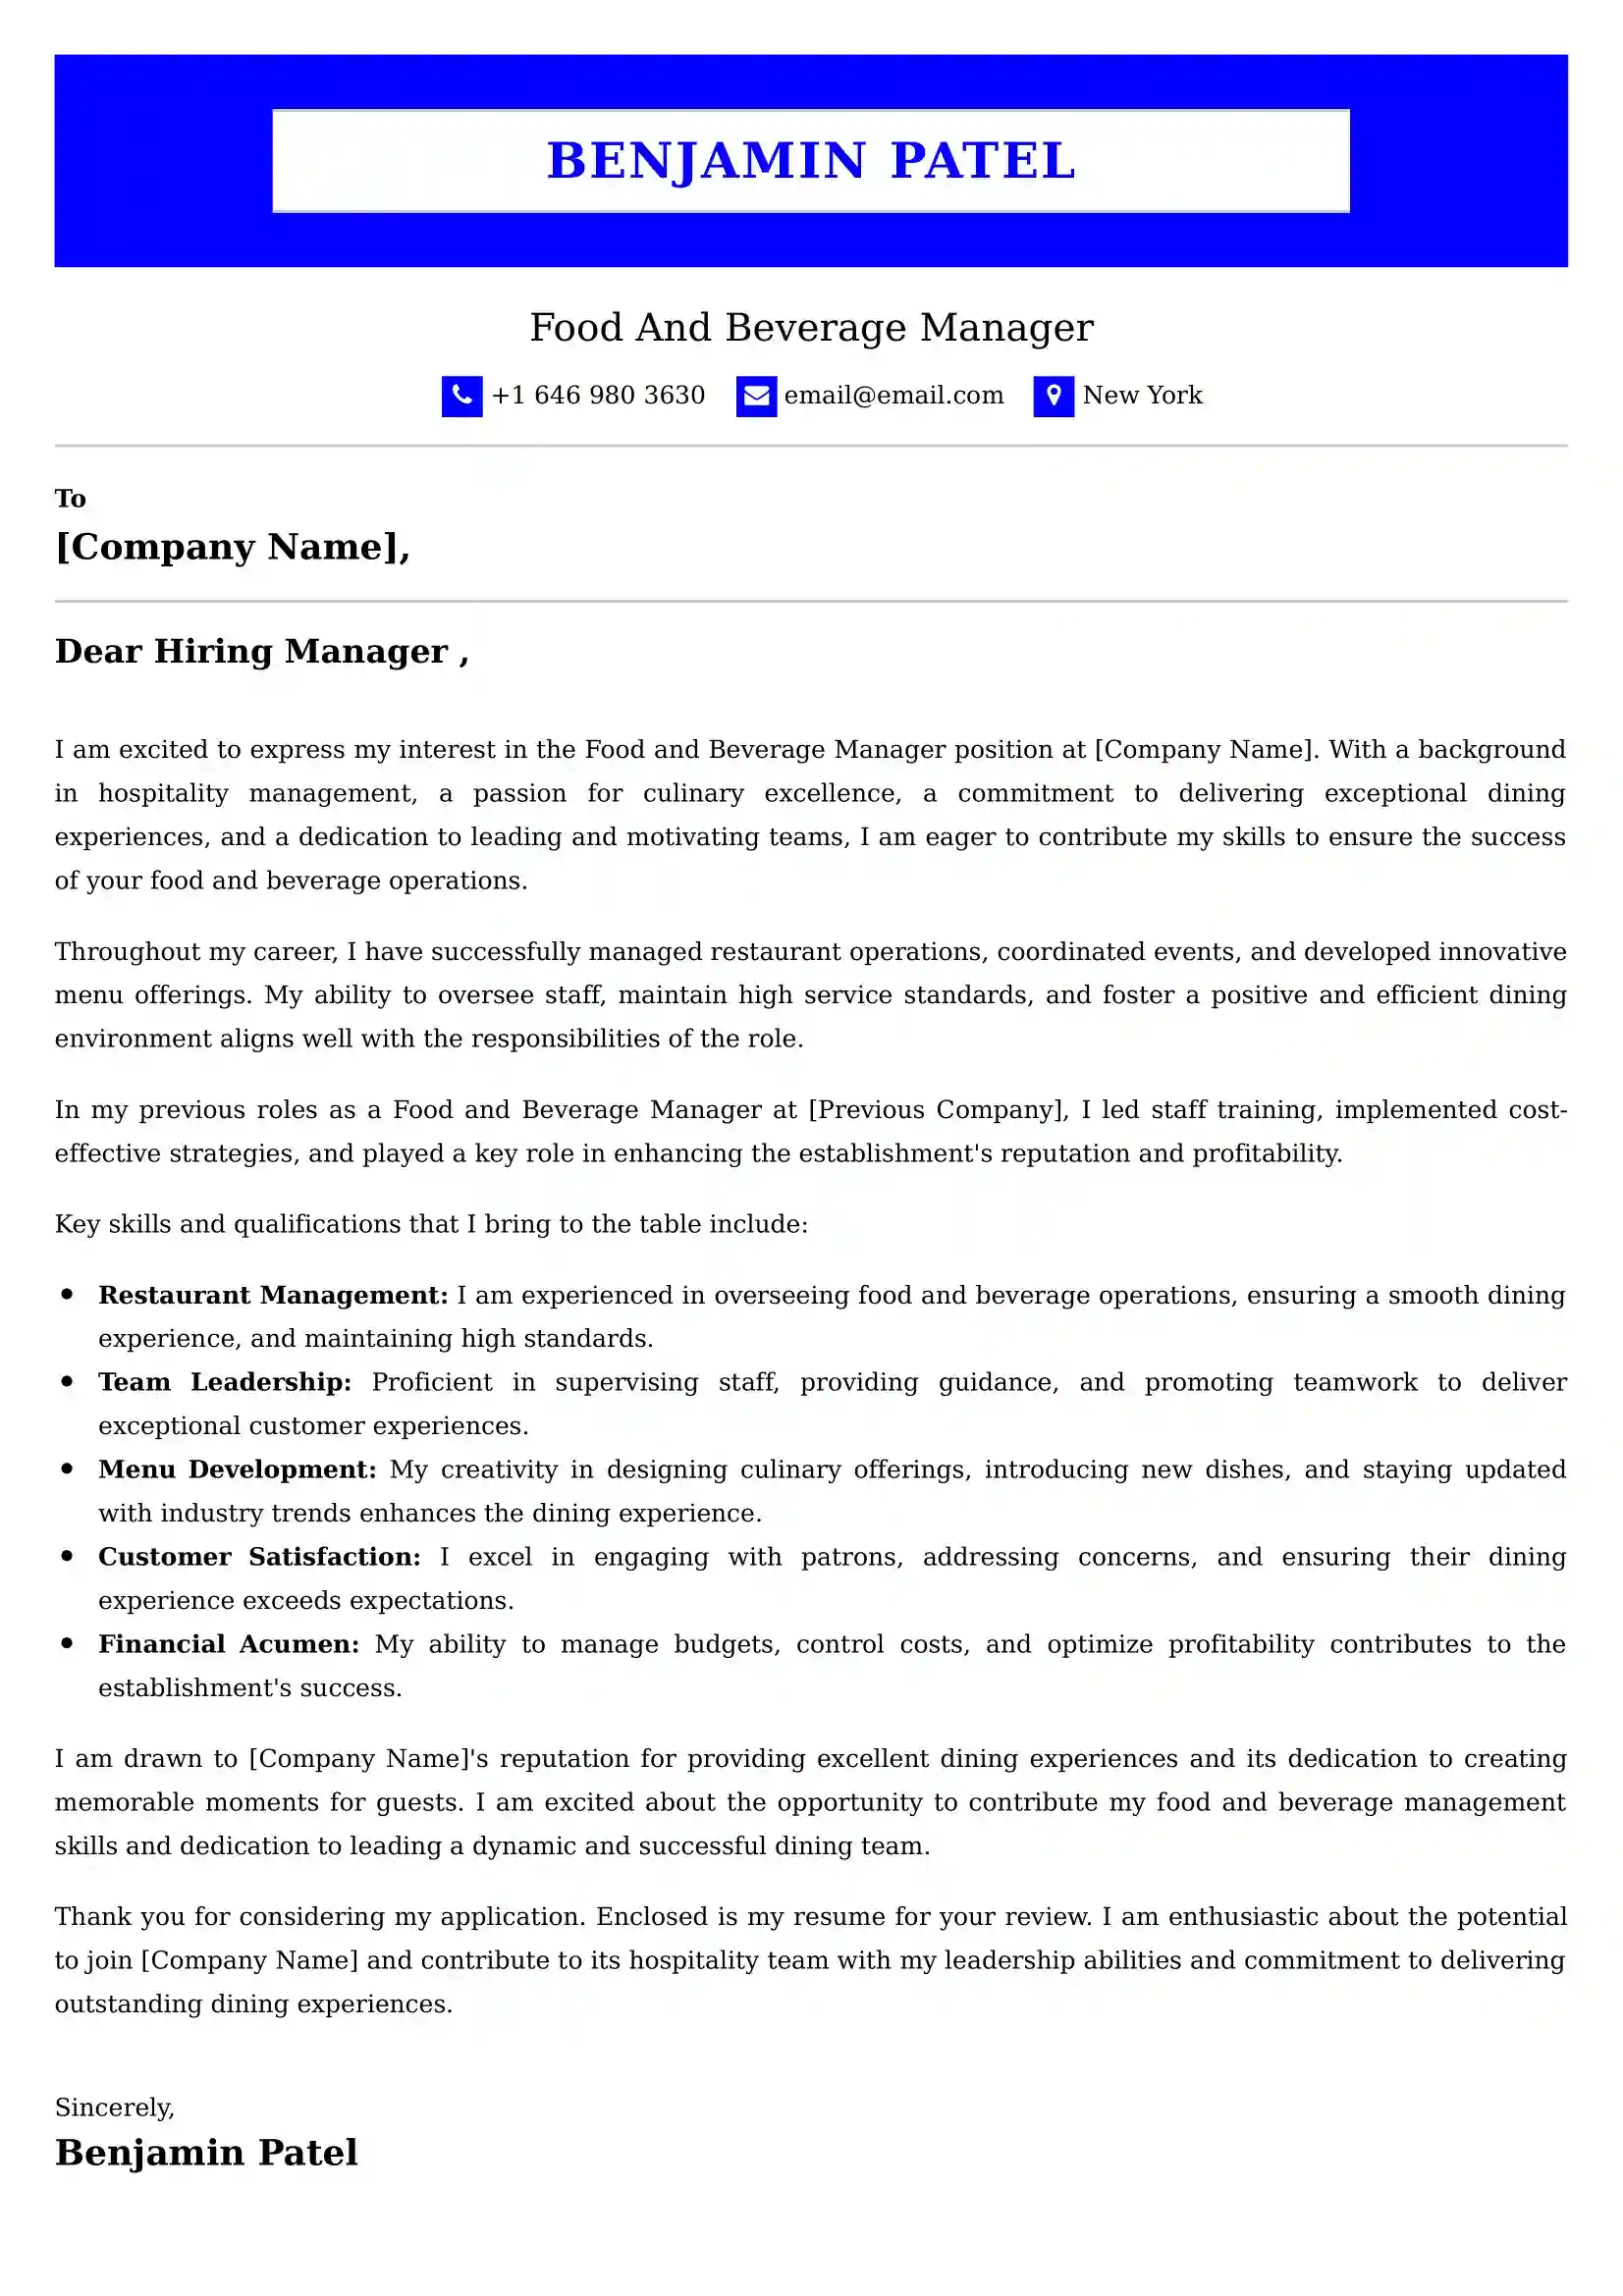 Food And Beverage Manager Cover Letter Examples India